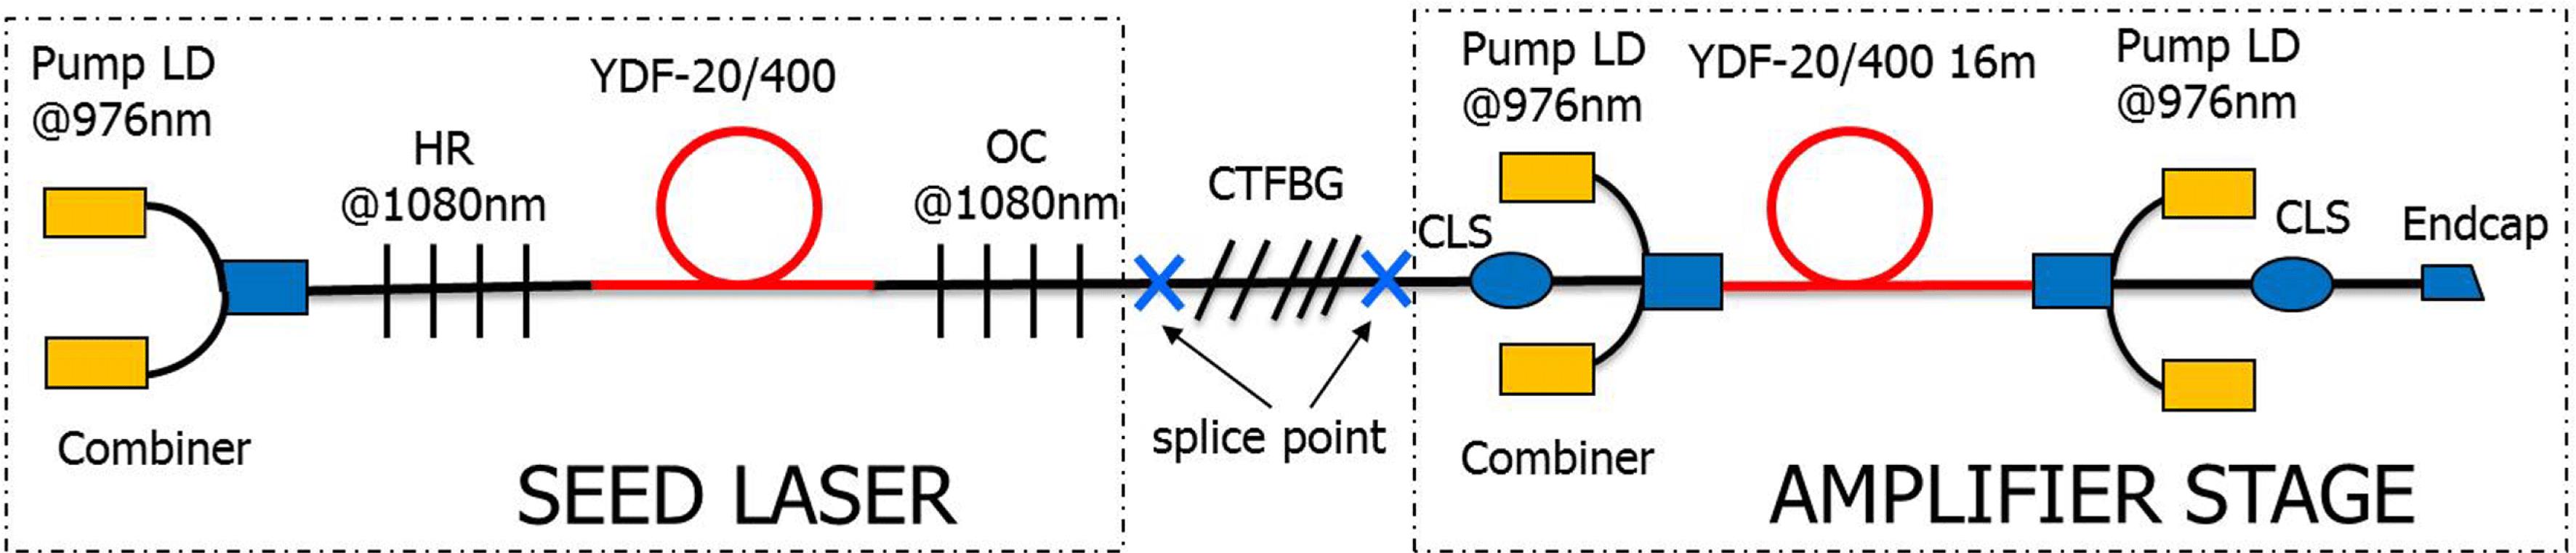 Experimental configuration for the mitigation of SRS in a bi-directional pumping fiber amplifier. HR: high reflection FBG, OC: output coupler FBG, LD: laser diode, YDF-$20/400$: LMA-YDF-$20/400$-M by Nufern, CLS: cladding light stripper.